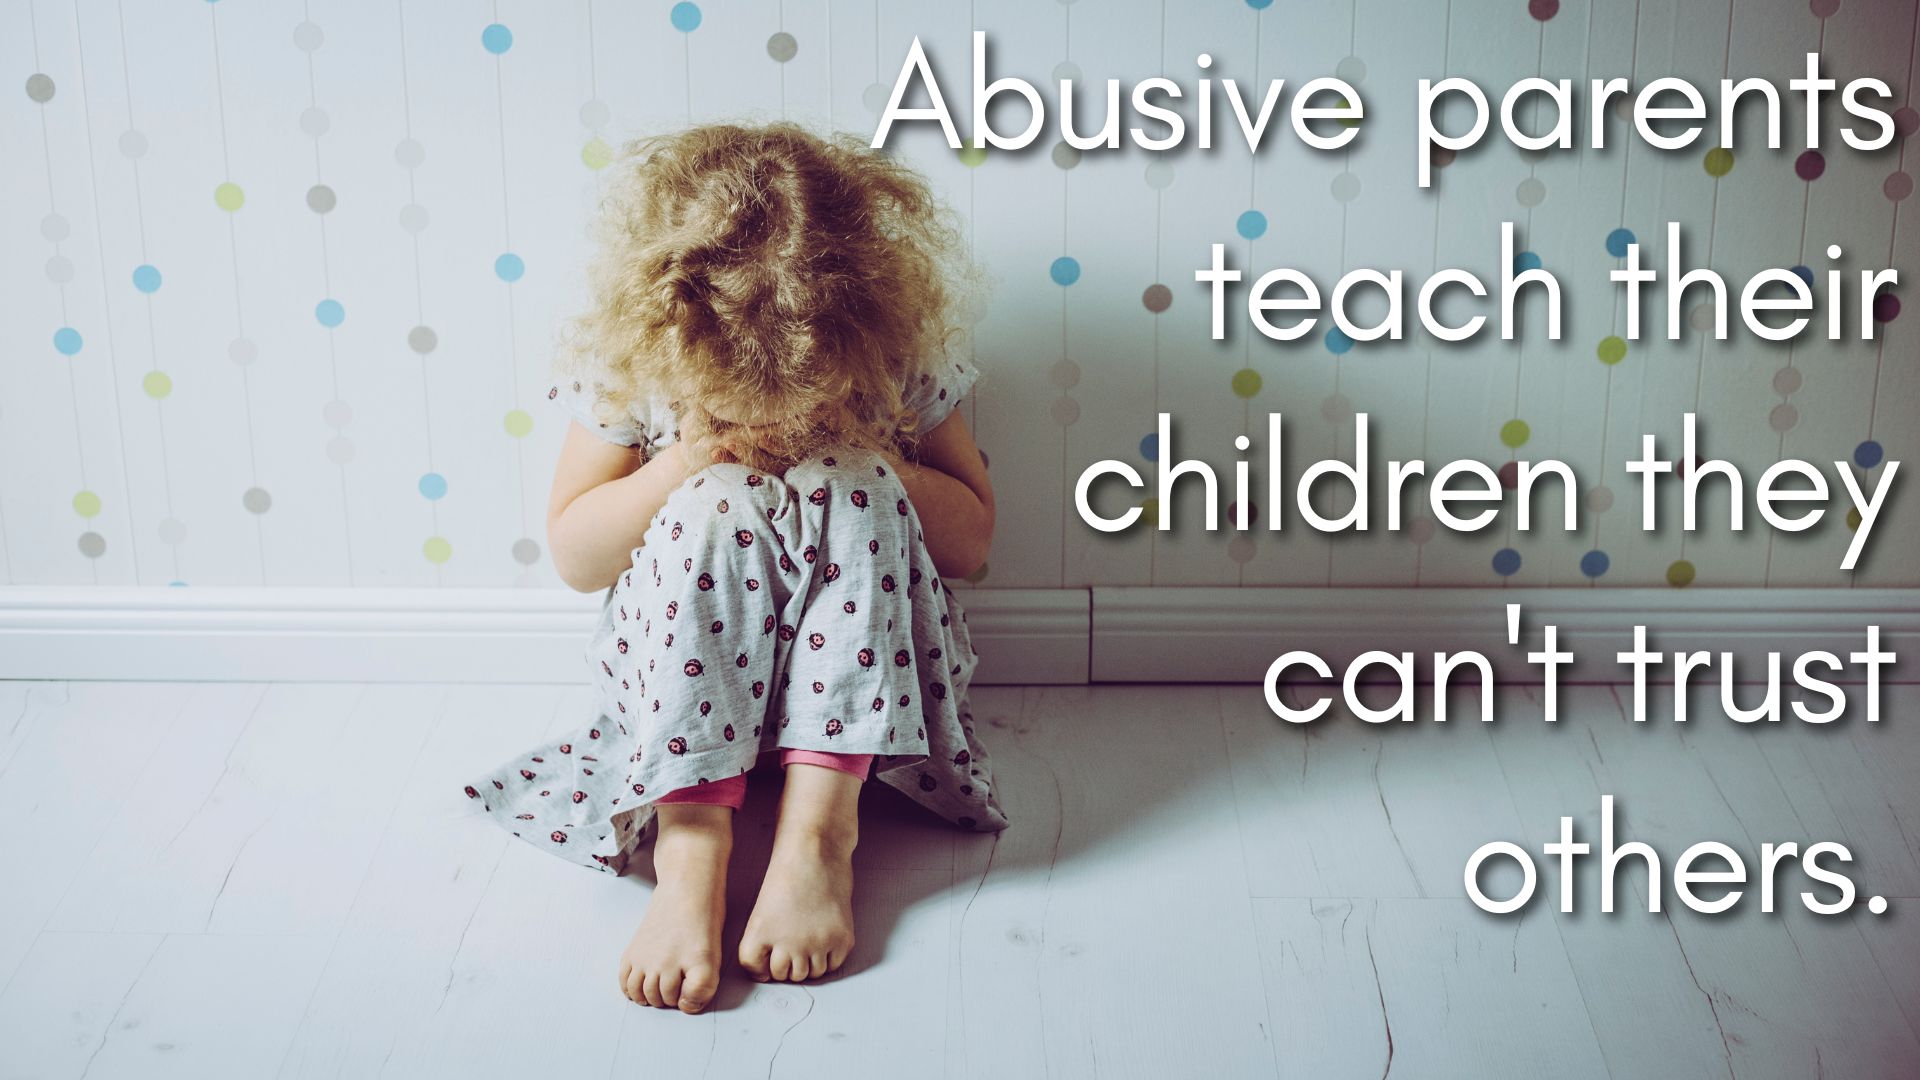 Abusive parents teach their children they can't trust others